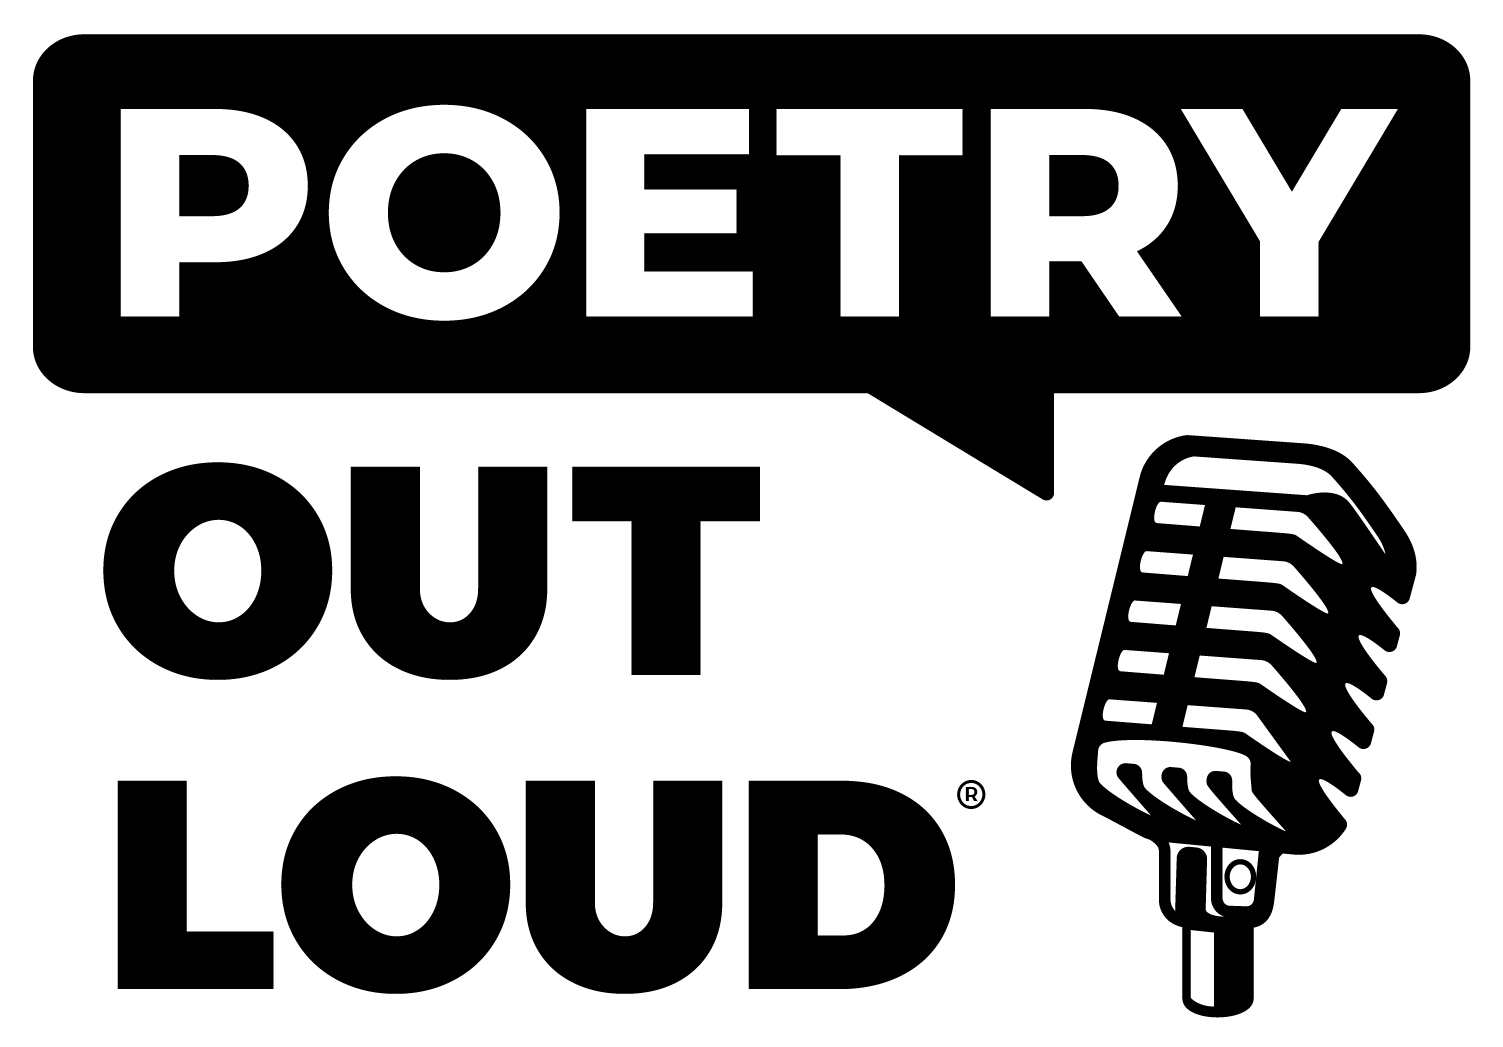 Poetry Out Loud Central Illinois Regional Contest To Take Place February 15